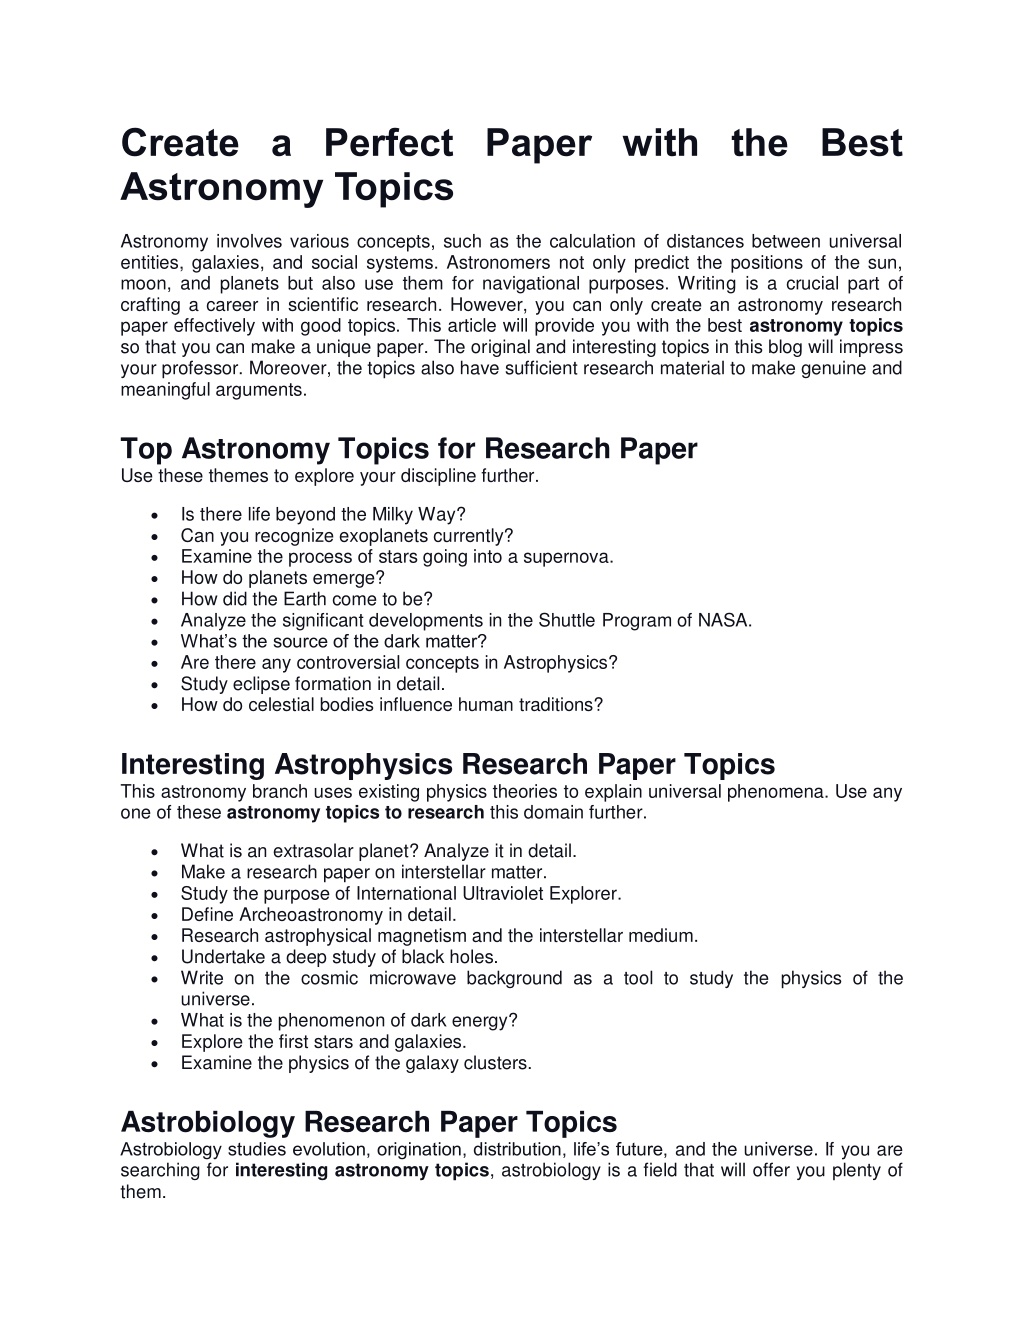 how to plan your astronomy research paper in ten steps